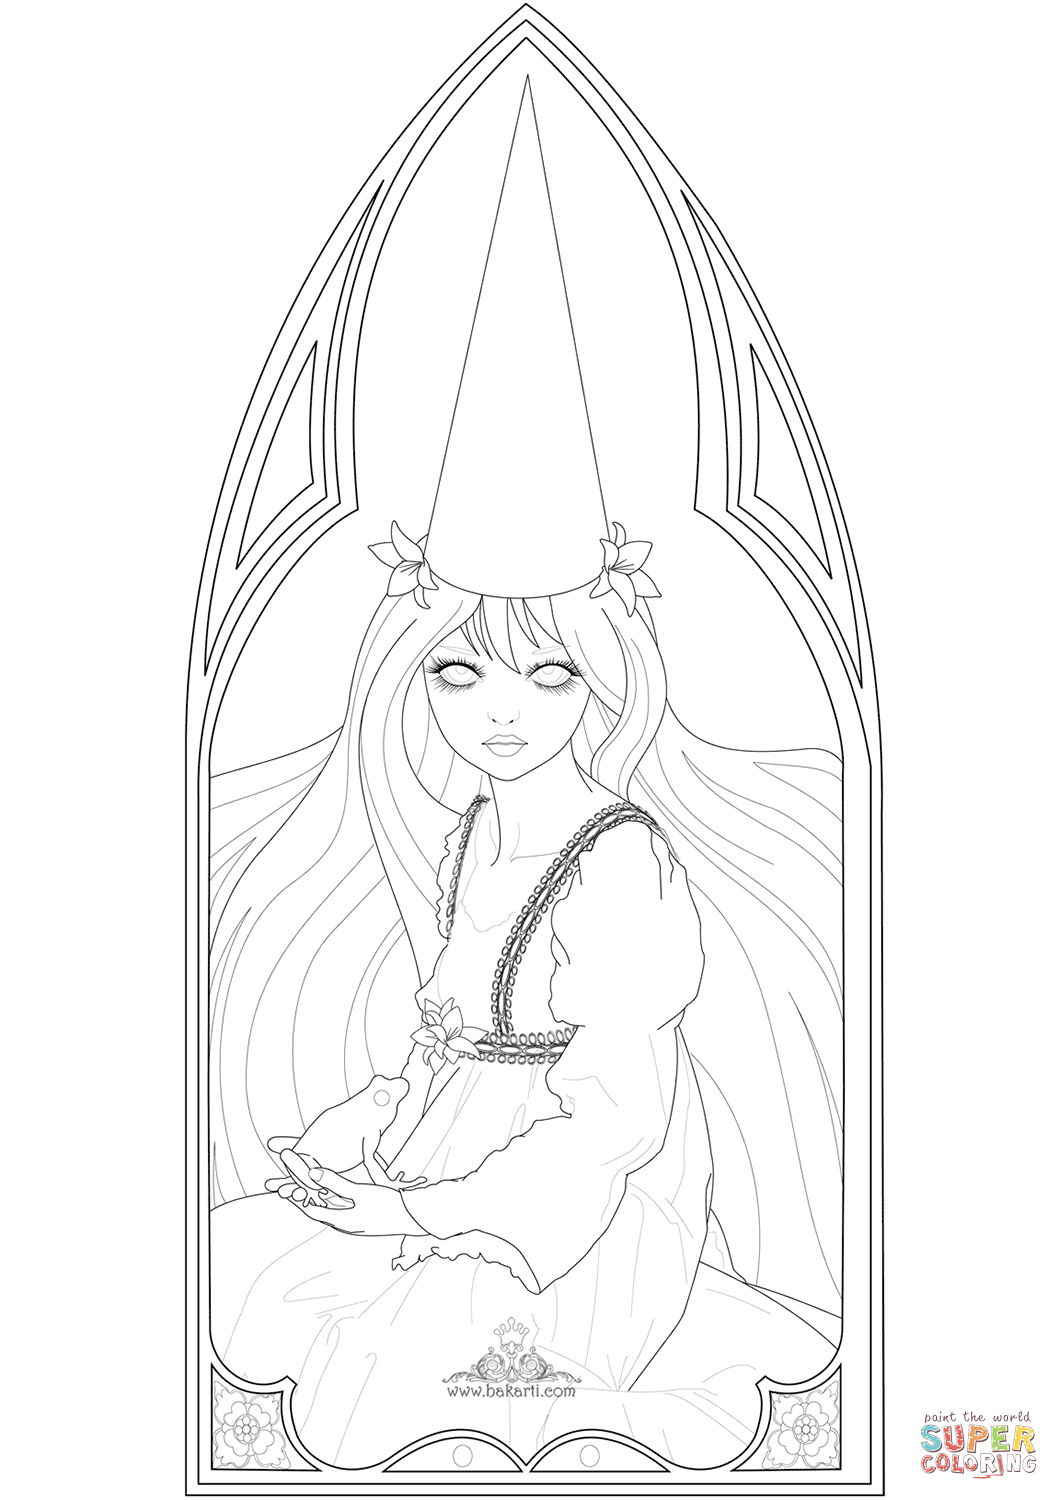 The princess and the frog coloring page free printable coloring pages